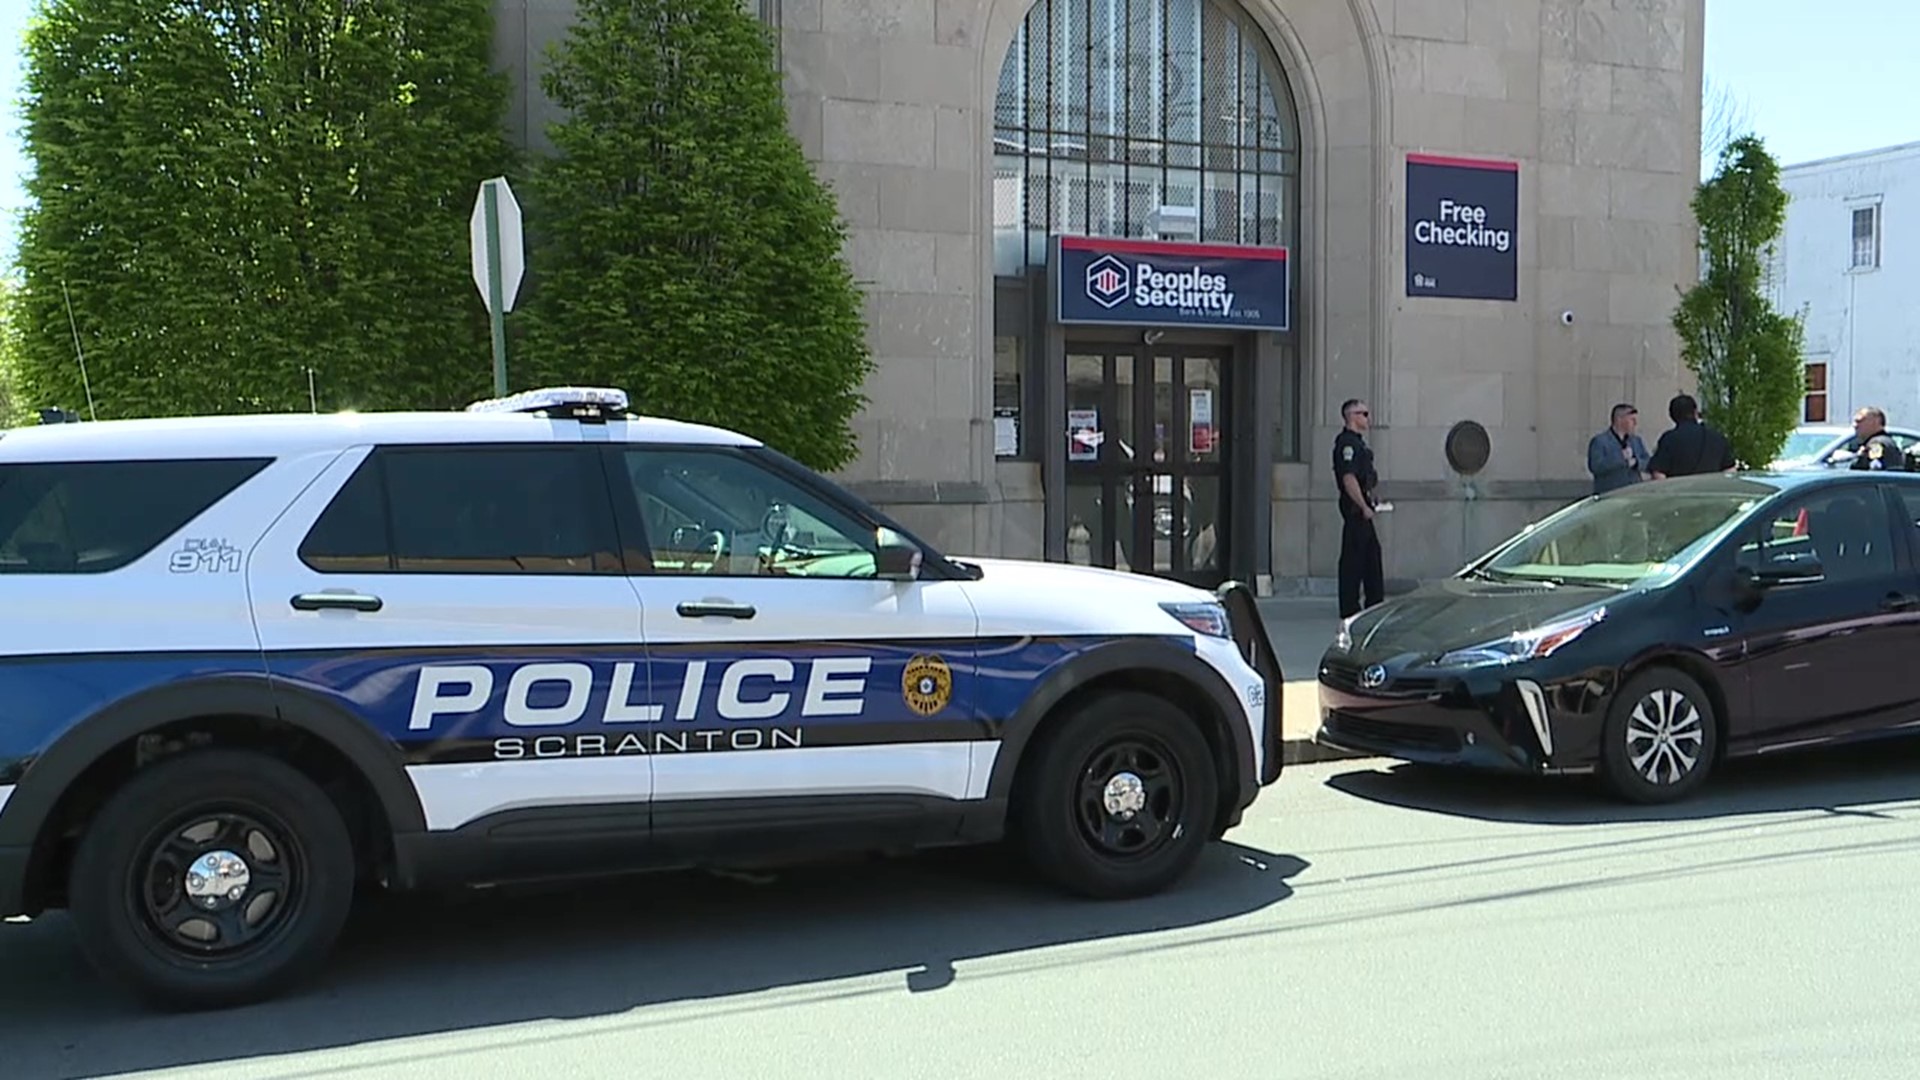 Investigators believe he robbed the Peoples Security Bank in Scranton on Tuesday.